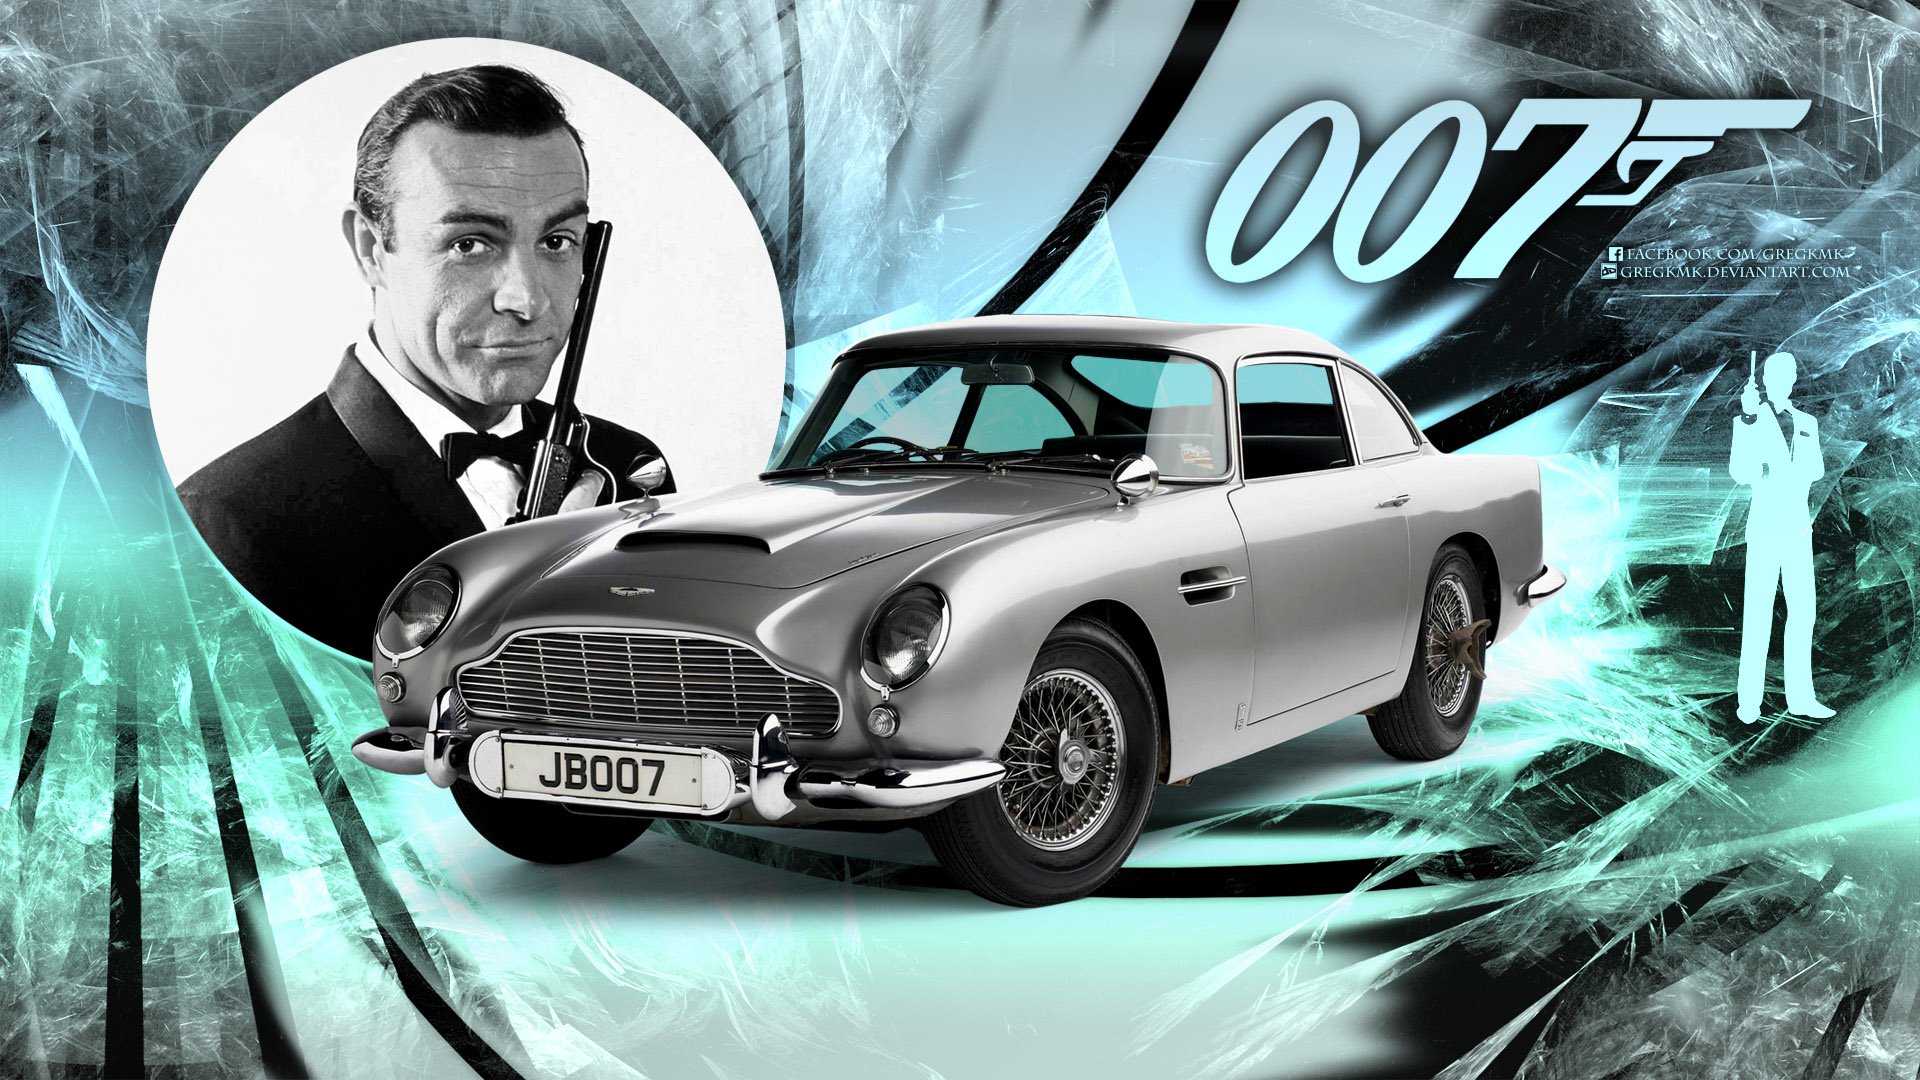 Sean Connery James Bond Wallpapers